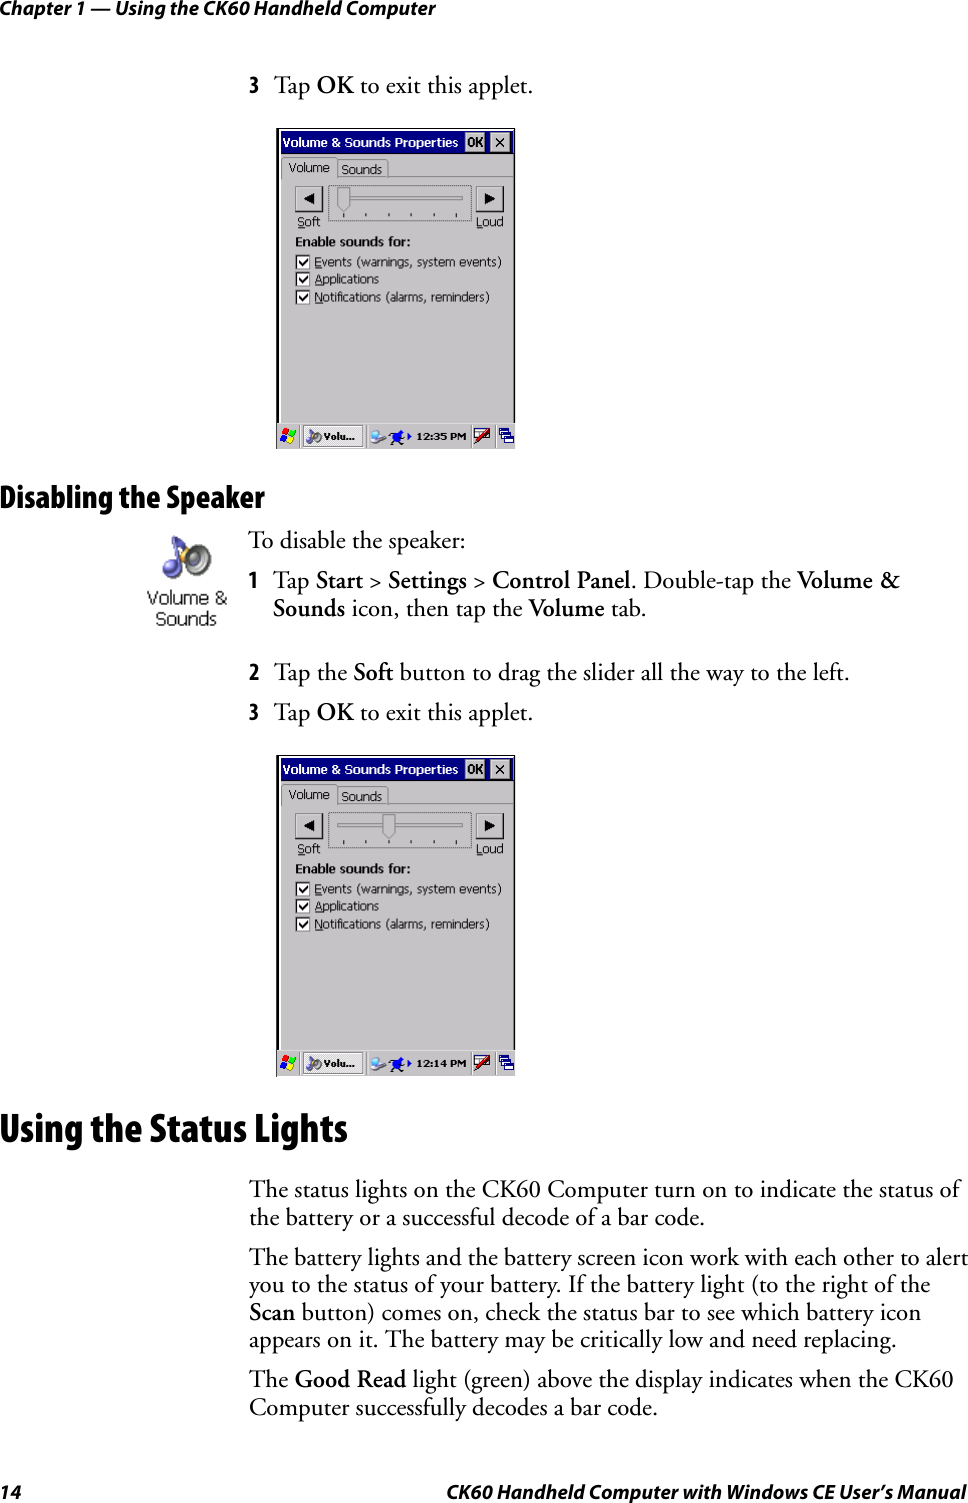 Chapter 1 — Using the CK60 Handheld Computer14 CK60 Handheld Computer with Windows CE User’s Manual3Tap OK to exit this applet.Disabling the Speaker2Tap the Soft button to drag the slider all the way to the left.3Tap OK to exit this applet.Using the Status LightsThe status lights on the CK60 Computer turn on to indicate the status of the battery or a successful decode of a bar code.The battery lights and the battery screen icon work with each other to alert you to the status of your battery. If the battery light (to the right of the Scan button) comes on, check the status bar to see which battery icon appears on it. The battery may be critically low and need replacing.The Good Read light (green) above the display indicates when the CK60 Computer successfully decodes a bar code.To disable the speaker:1Tap Start &gt; Settings &gt; Control Panel. Double-tap the Volume &amp; Sounds icon, then tap the Volume tab.